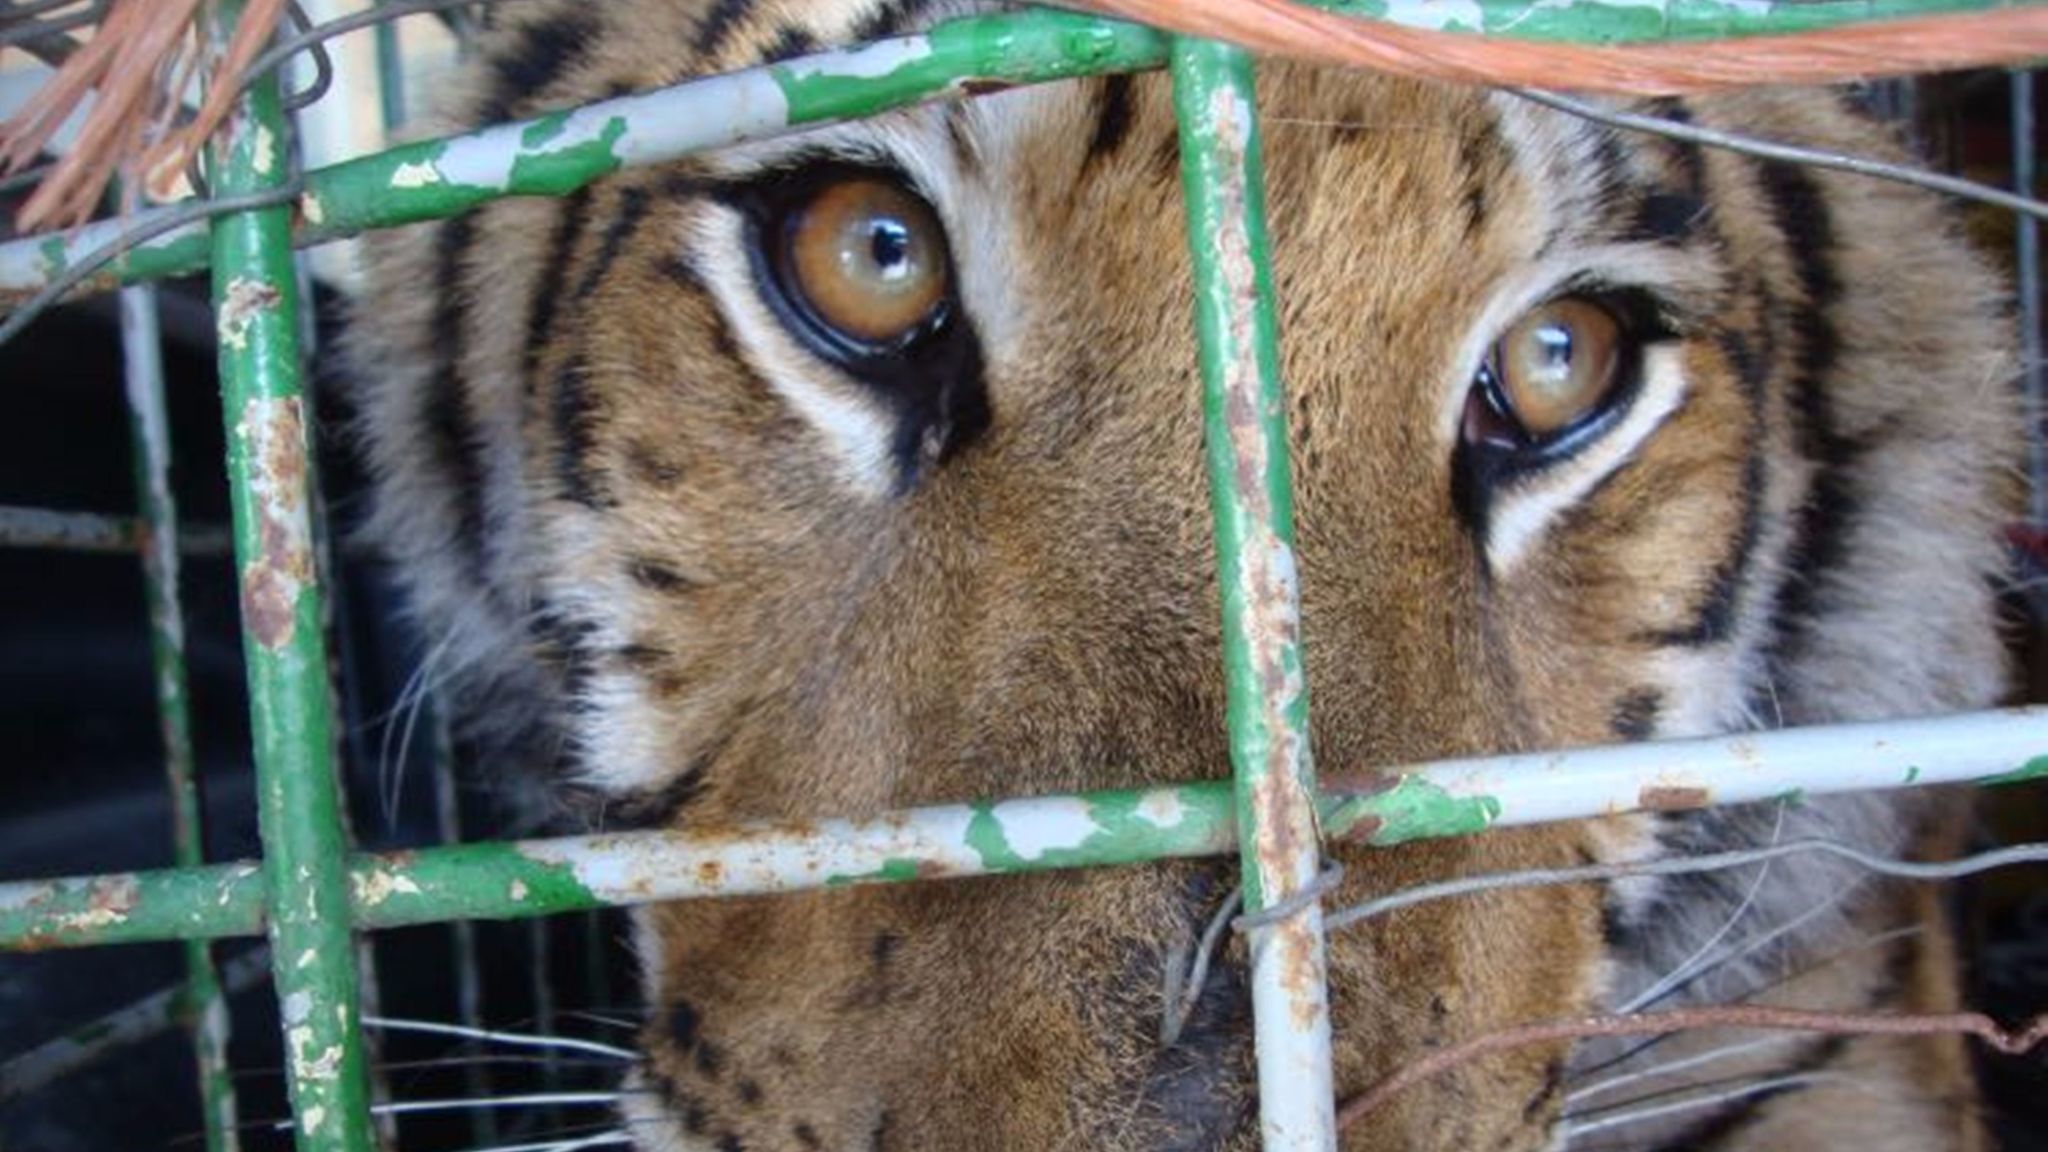 Bengal tiger seized in Tijuana after falling from terrace - The San ...